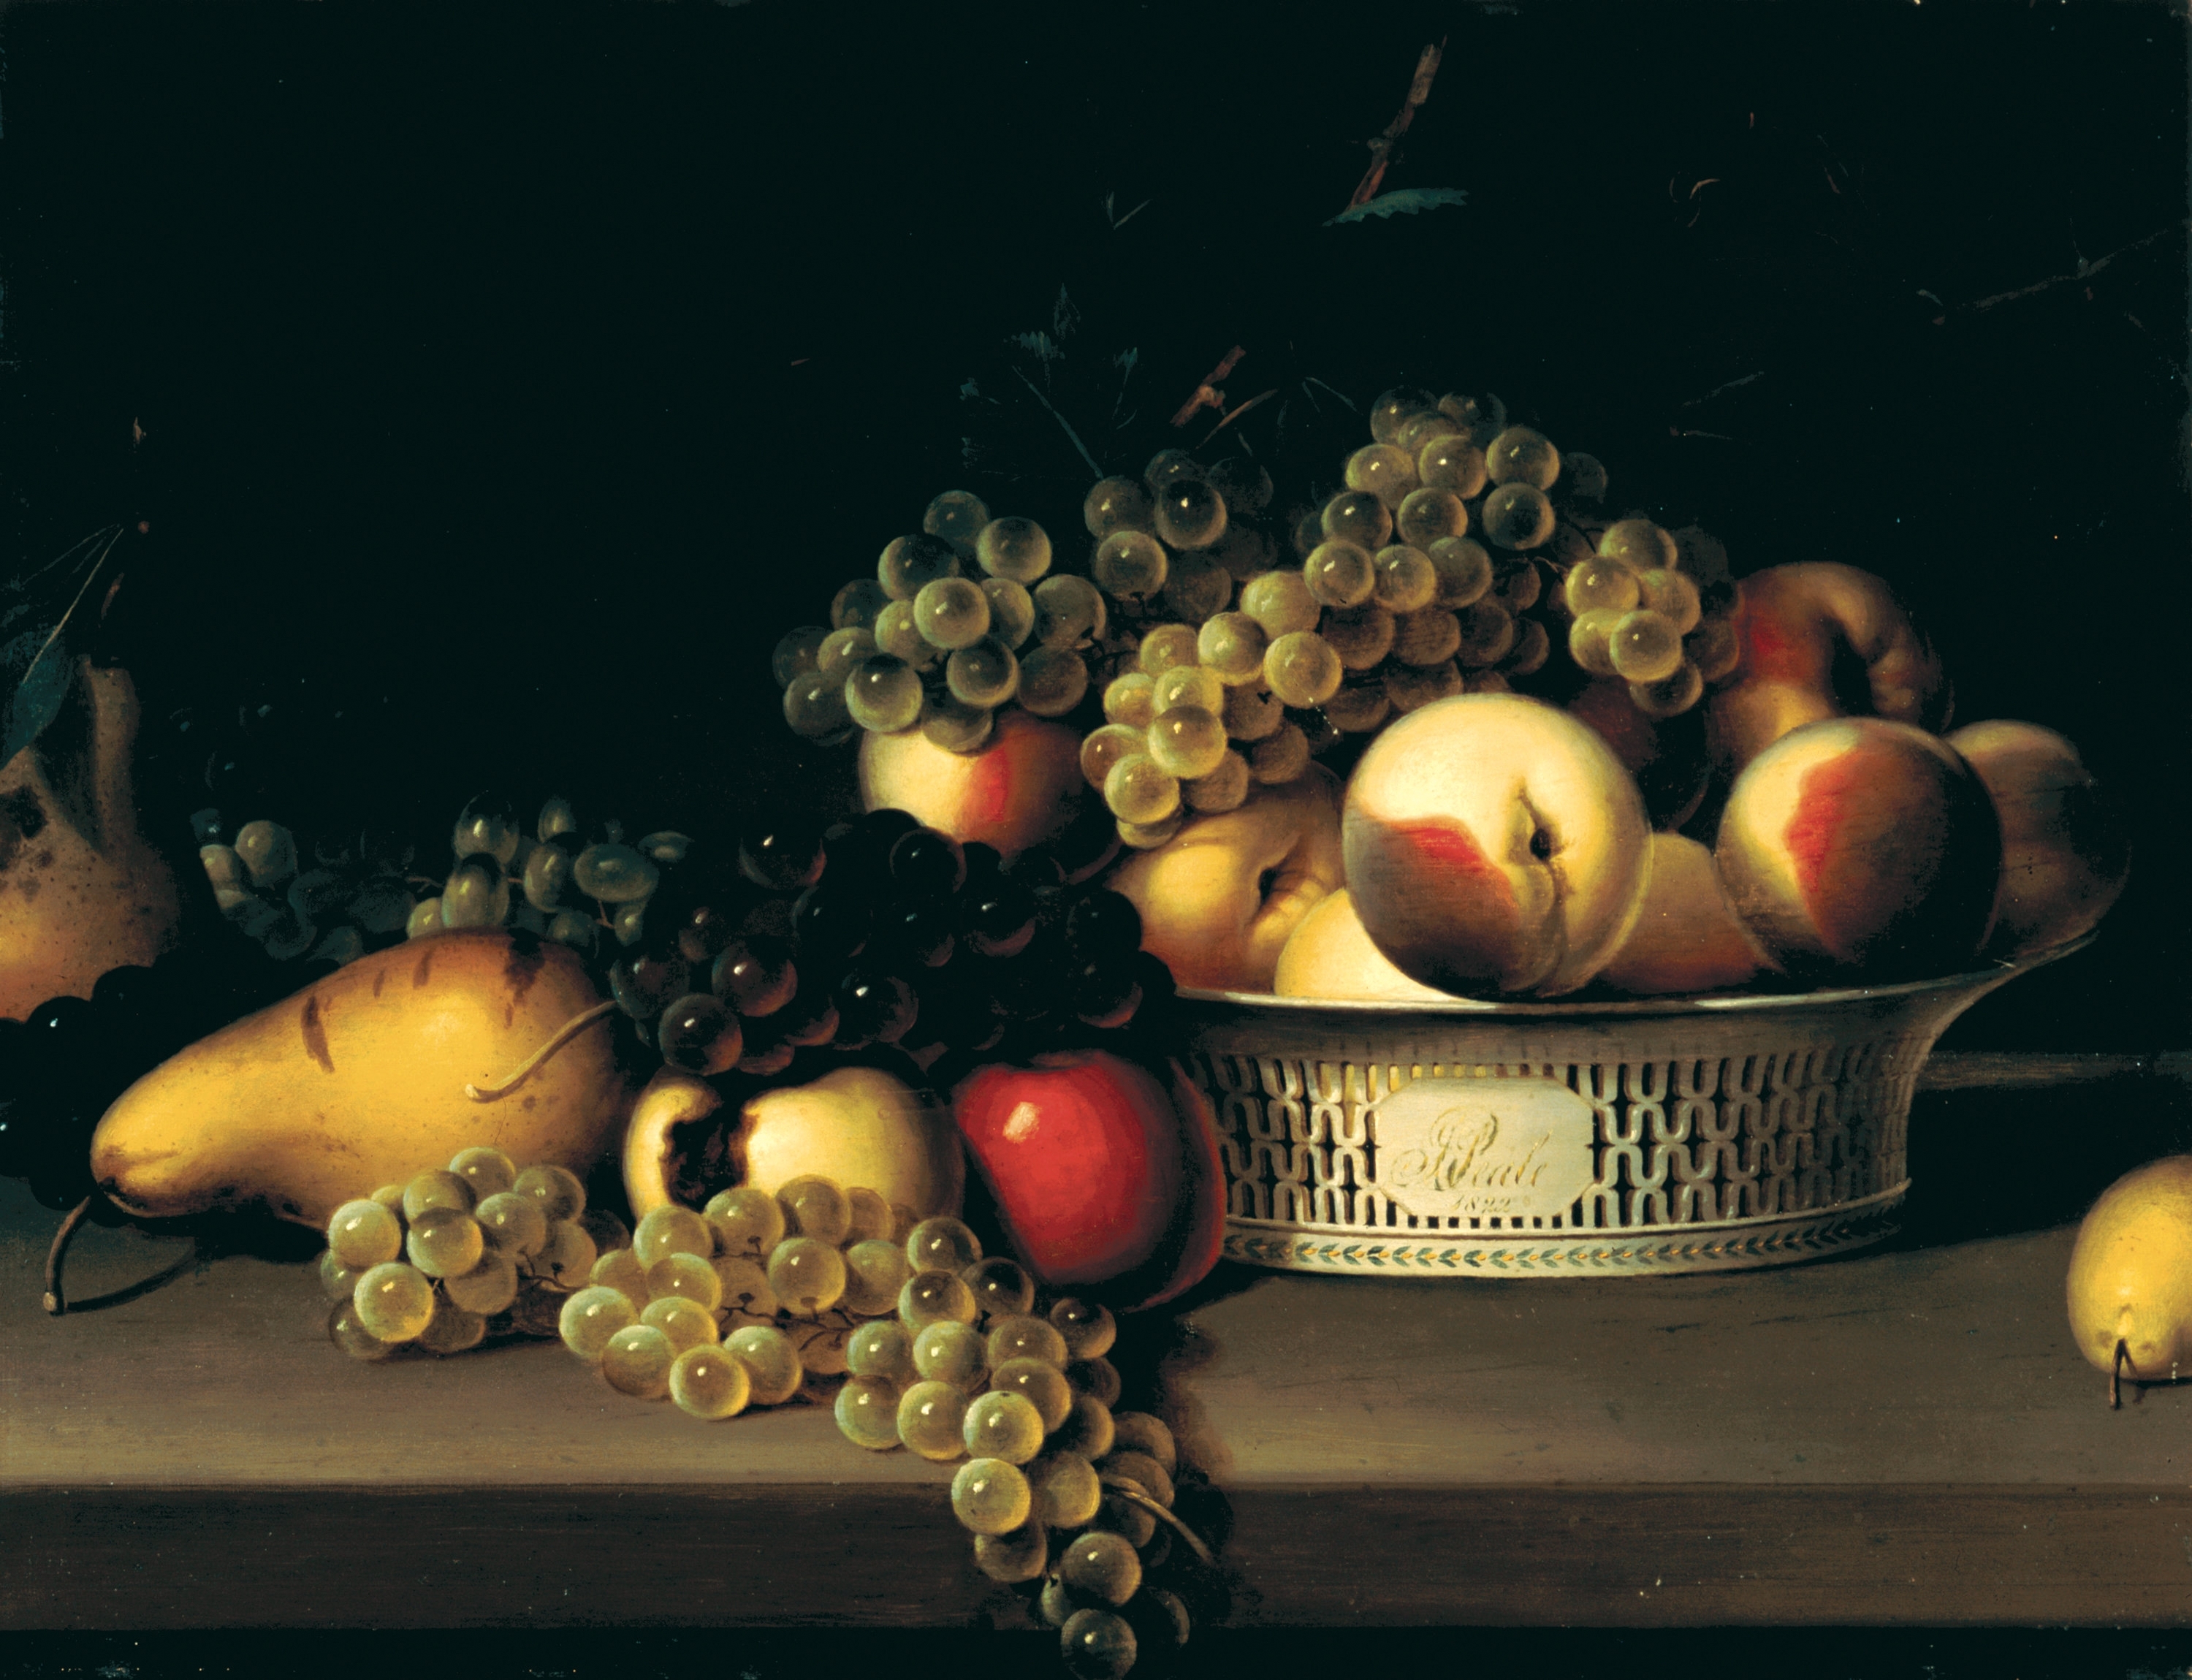 Fruit in a Chinese Export Basket by James Peale, 1822